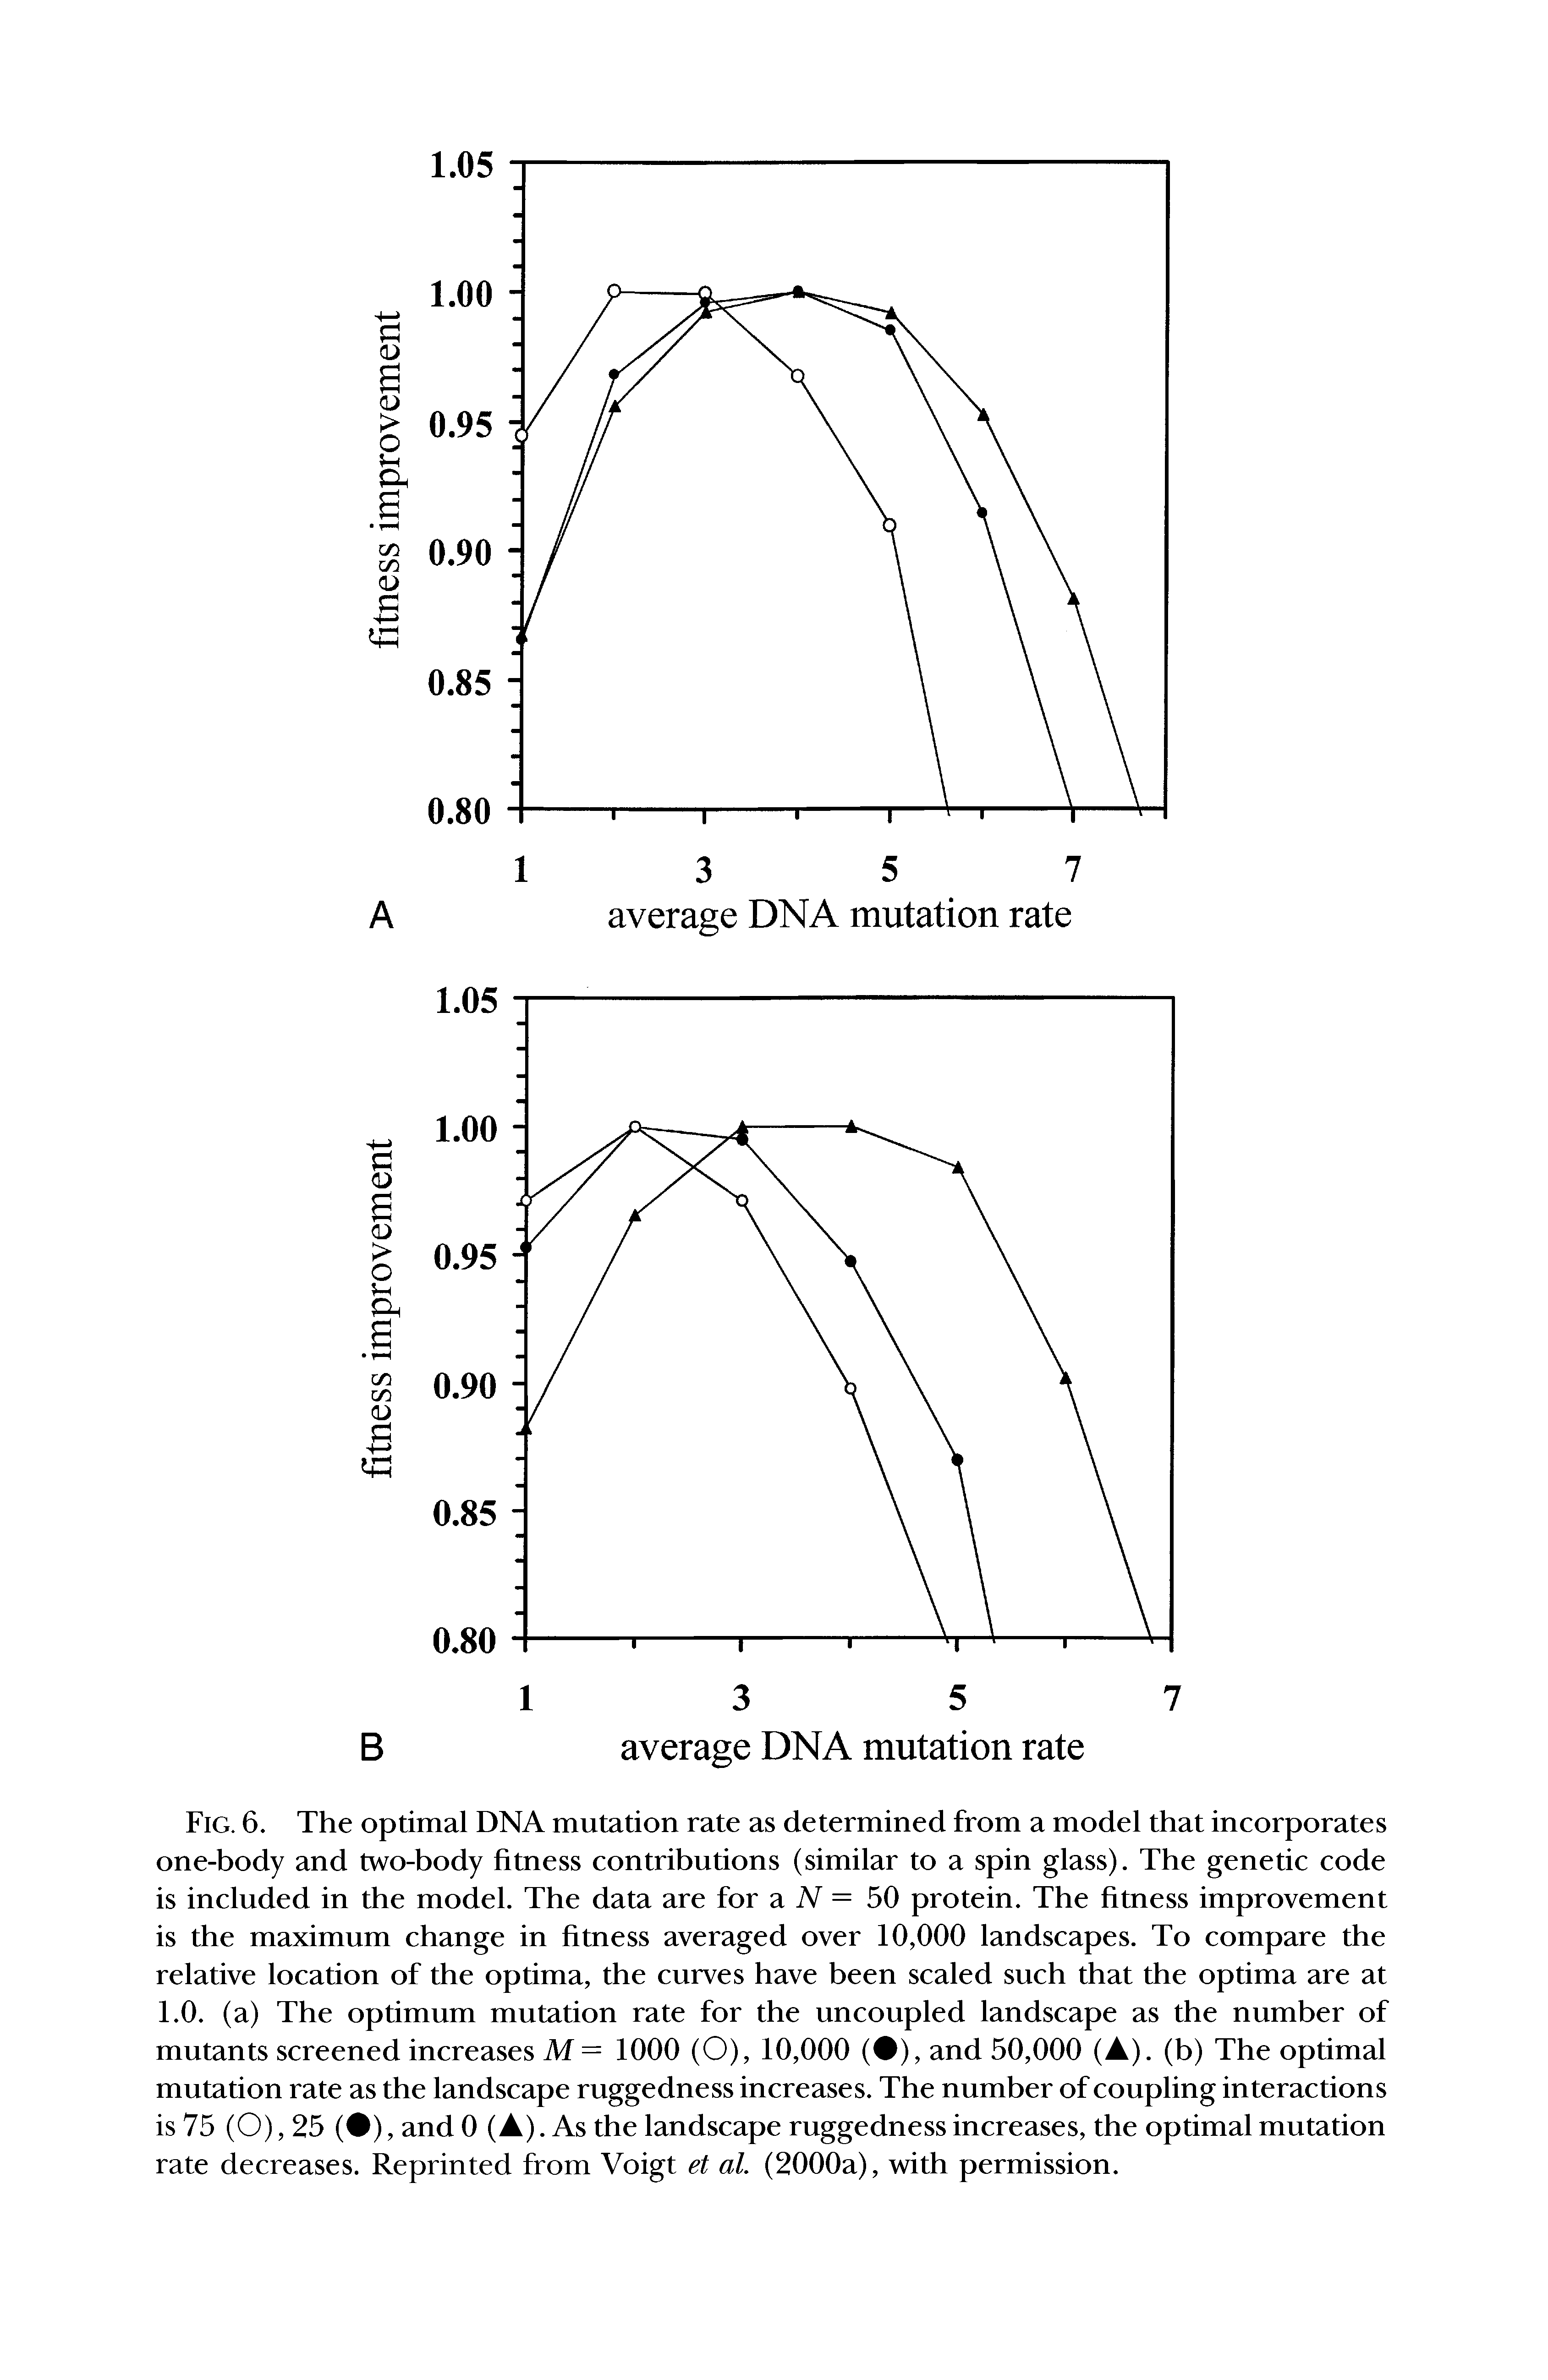 Fig. 6. The optimal DNA mutation rate as determined from a model that incorporates one-body and two-body fitness contributions (similar to a spin glass). The genetic code is included in the model. The data are for a N = 50 protein. The fitness improvement is the maximum change in fitness averaged over 10,000 landscapes. To compare the relative location of the optima, the curves have been scaled such that the optima are at 1.0. (a) The optimum mutation rate for the uncoupled landscape as the number of mutants screened increases M= 1000 (O), 10,000 ( ), and 50,000 (A), (b) The optimal mutation rate as the landscape ruggedness increases. The number of coupling interactions is 75 (O), 25 ( ), and 0 (A). As the landscape ruggedness increases, the optimal mutation rate decreases. Reprinted from Voigt et ol. (2000a), with permission.